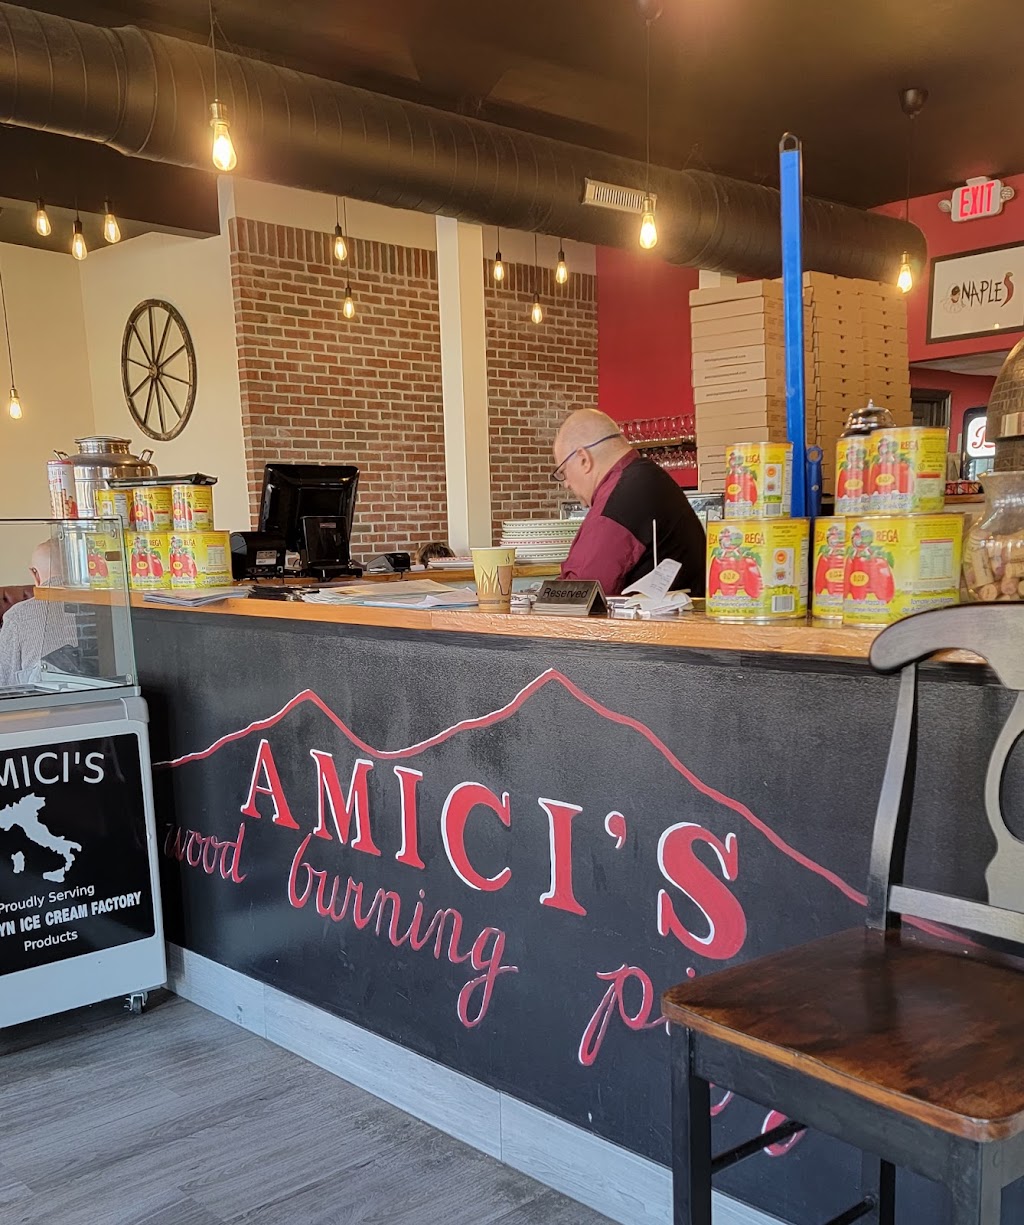 Amicis Restaurant | meal delivery | 28 W Pleasant Ave, Maywood, NJ 07607, USA | 2018810608 OR +1 201-881-0608